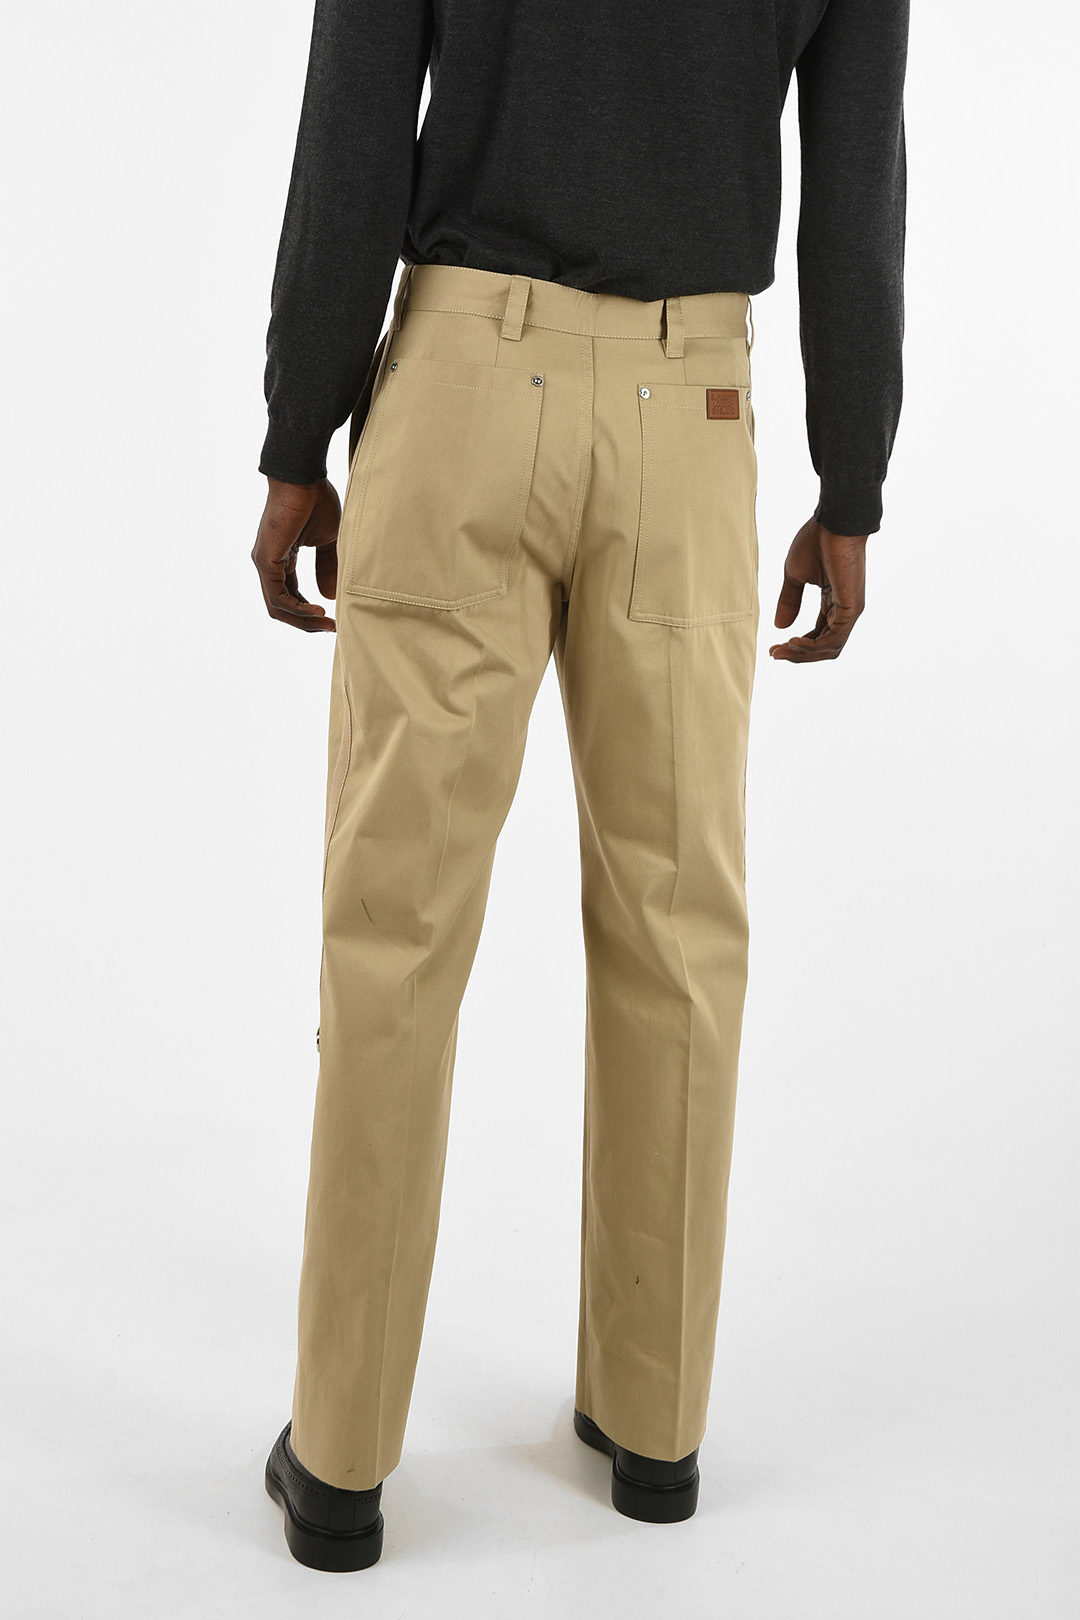 Burberry Cotton Straight Fit Pants with Jetted Pockets men - Glamood Outlet